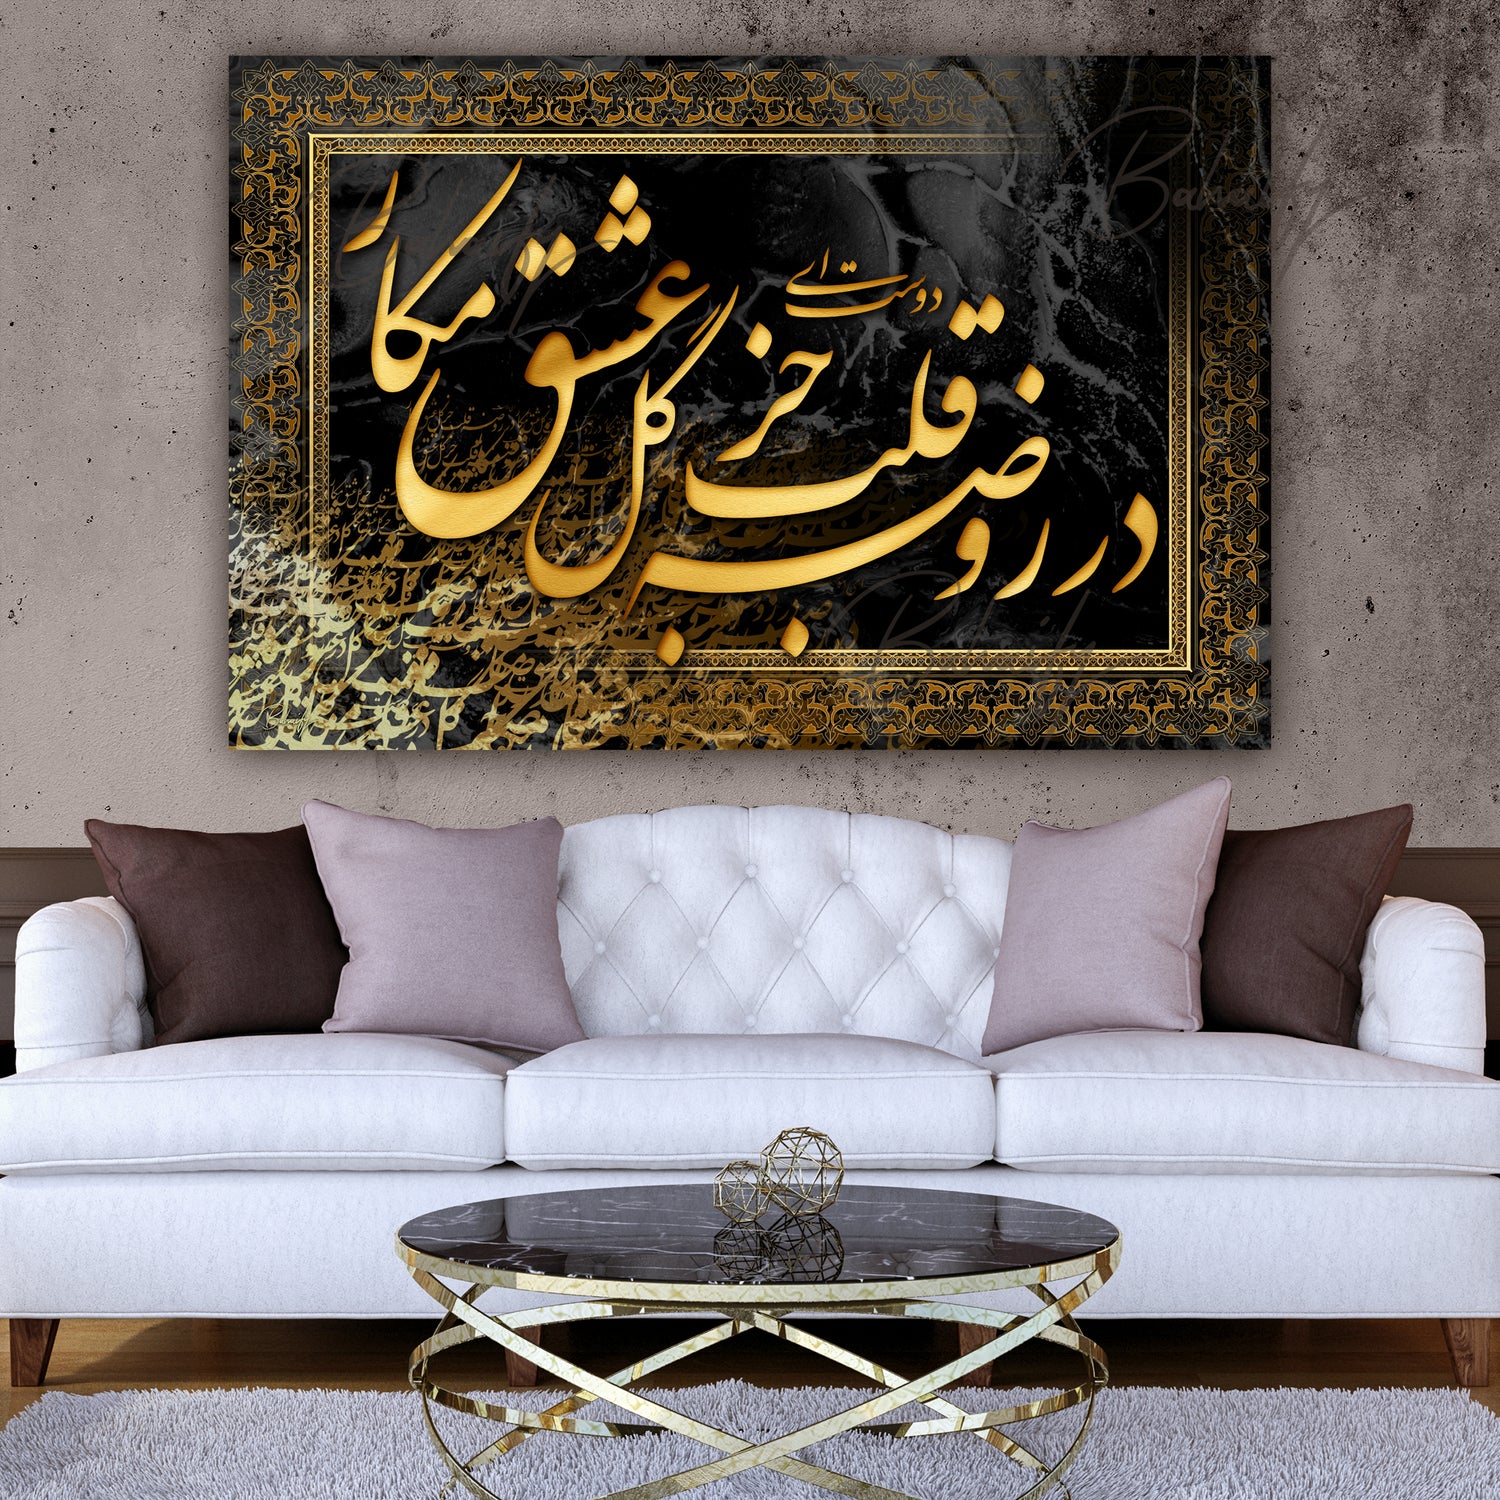 This handmade Baha'i wall art is a work of art, with Baha'i calligraphy. This wall art is both aesthetically beautiful and meaningful, as it brings the beauty and elegance of Baha'i culture into your home. کلمات مکنونه -روضهٴ قلب - گل عشق Modern Baha'i Wall Art, baha'i Prayers, Baha'i Temple, Baha'i Quotes, Baha'i Writings -Hidden Words -the rose of love-Baha'i Art, Baha'i Digital Art, Baha'i Calligraphy, Baha'i Artwork, Baha'i Wall Art, Baha'i Calligraphy Wall Art, 